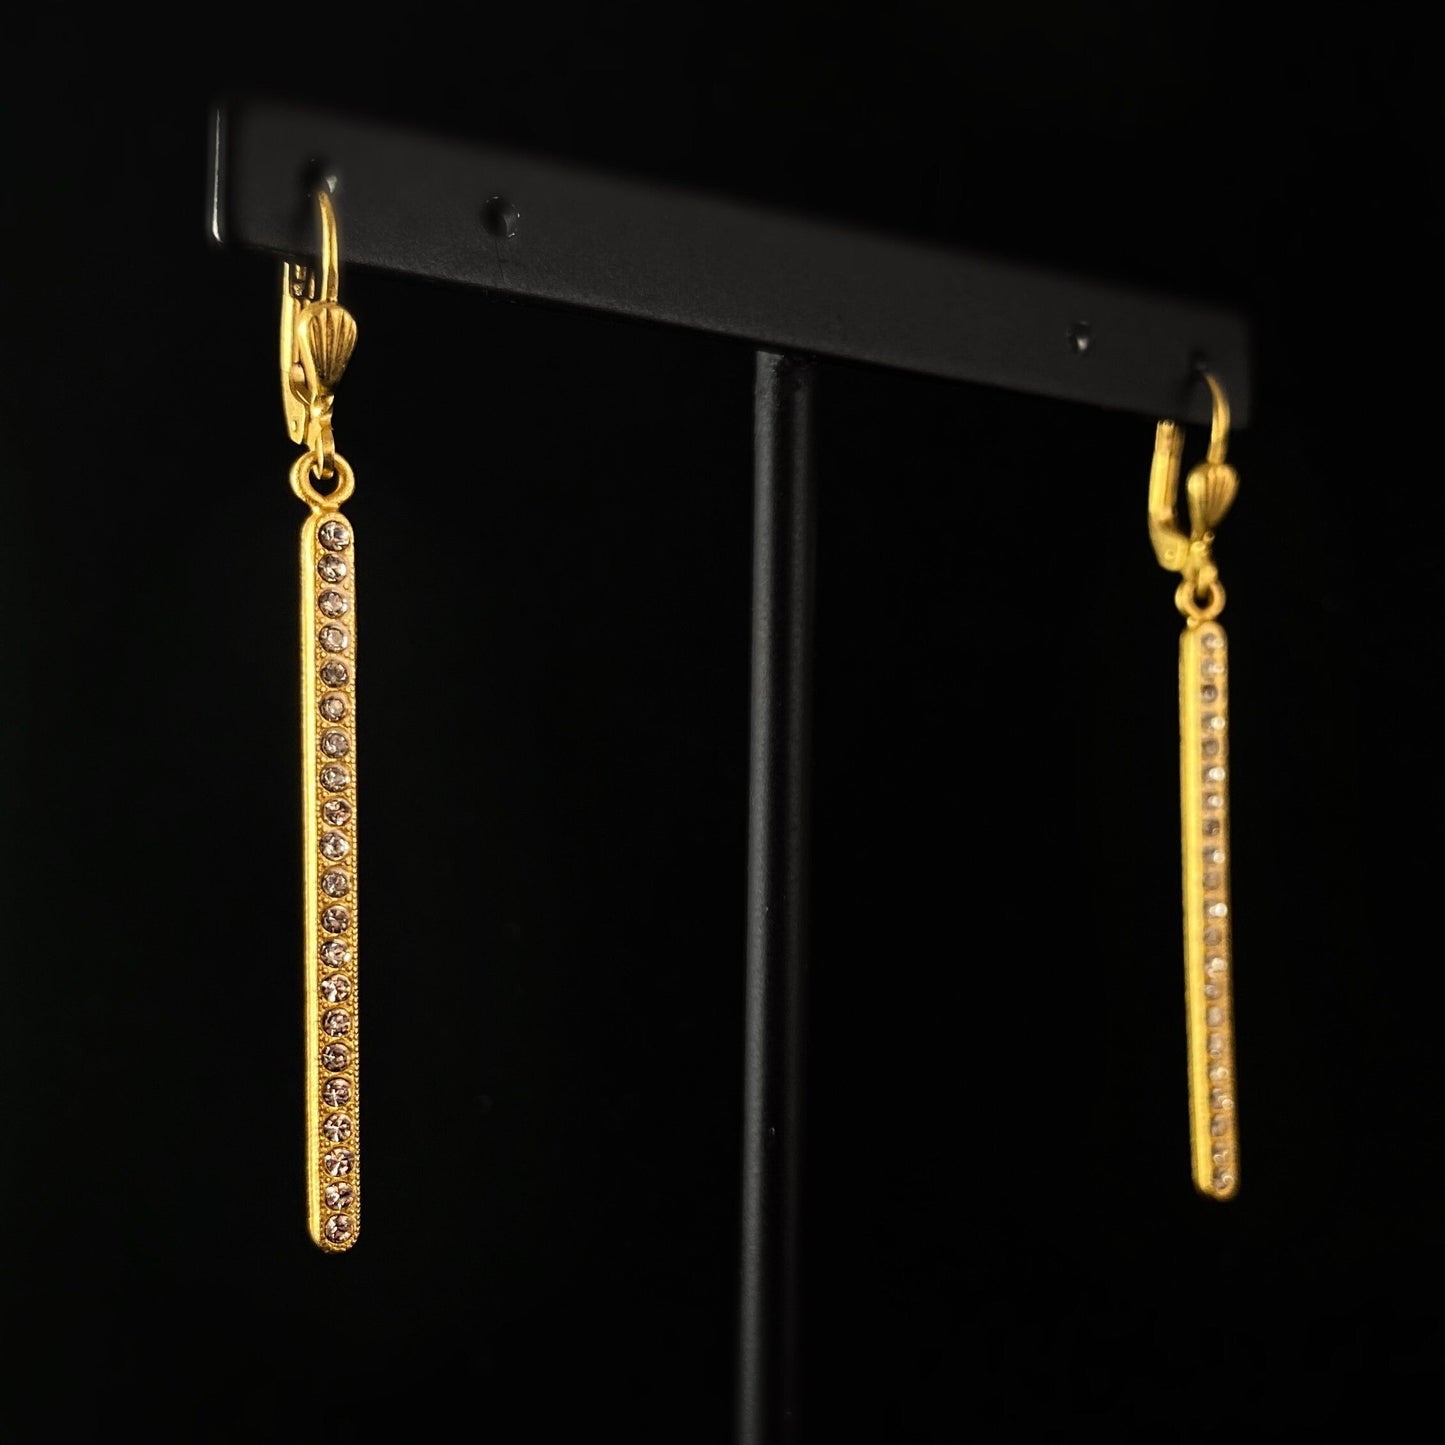 Gold Vertical Bar Earrings with Clear Swarovski Crystals - La Vie Parisienne by Catherine Popesco